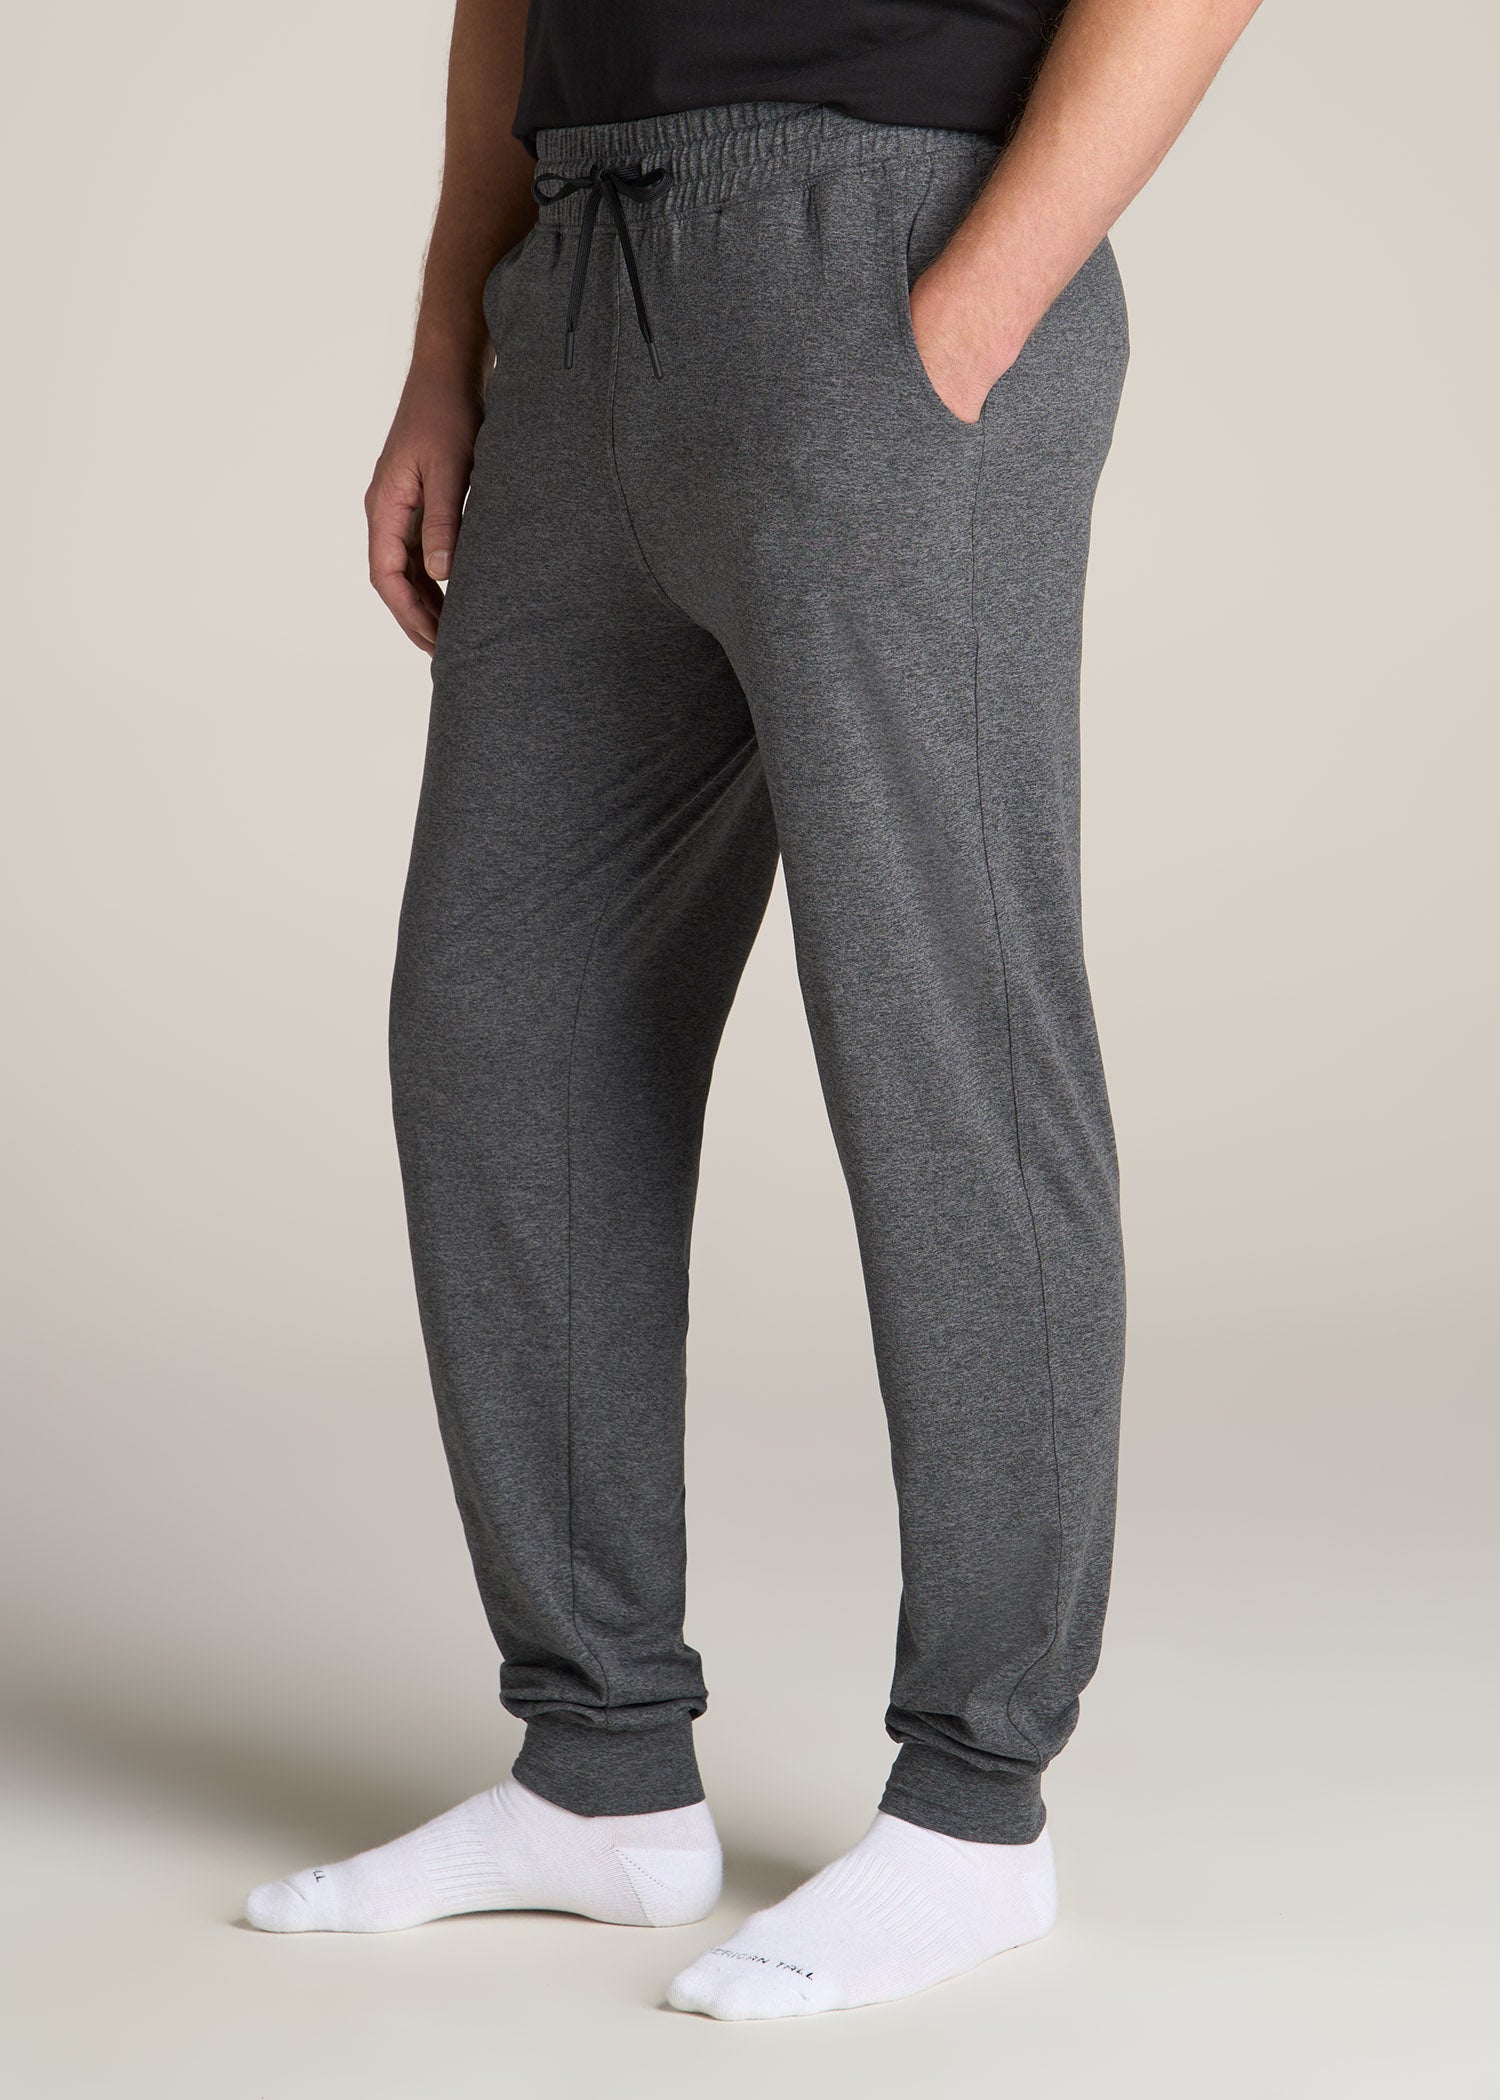 Find more American Eagle Sweater Leggings for sale at up to 90% off